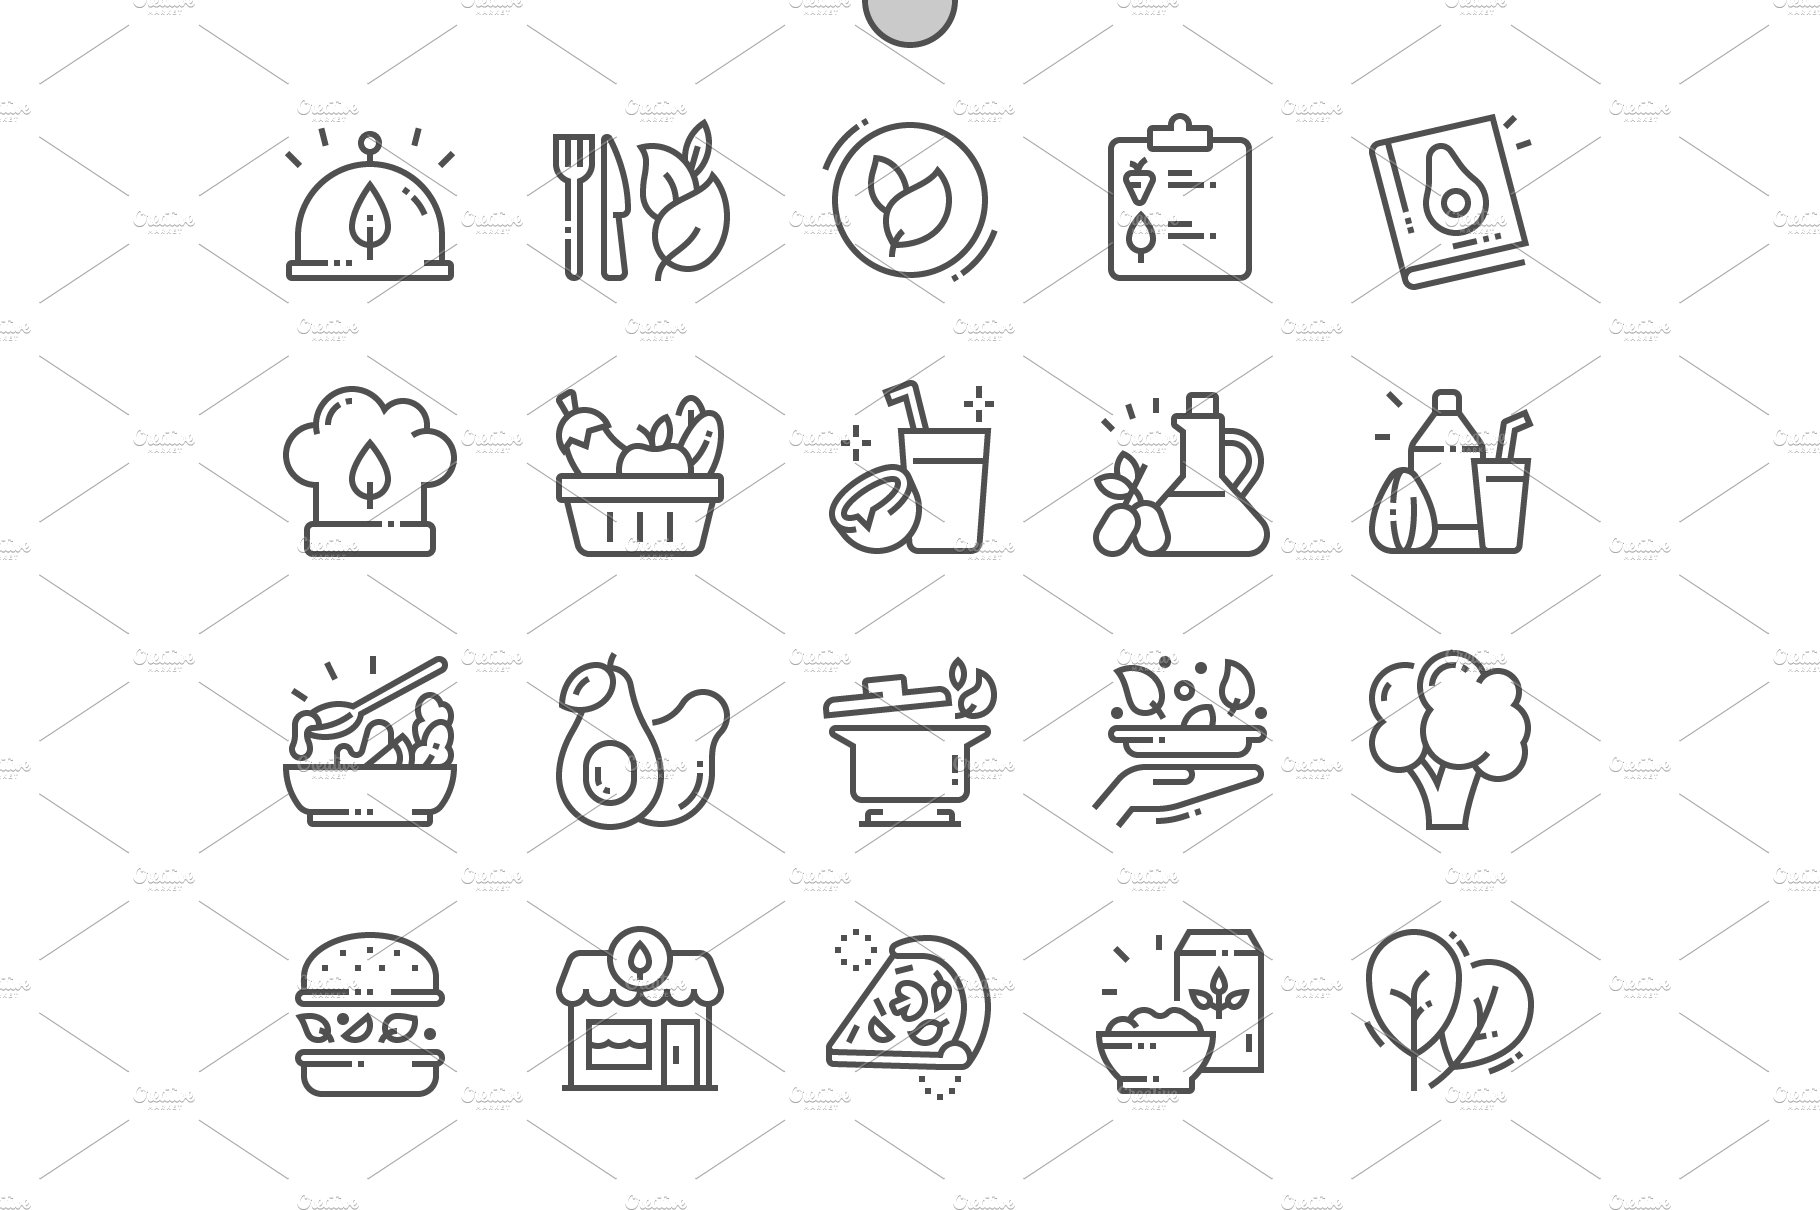 Vegan Line Icons cover image.